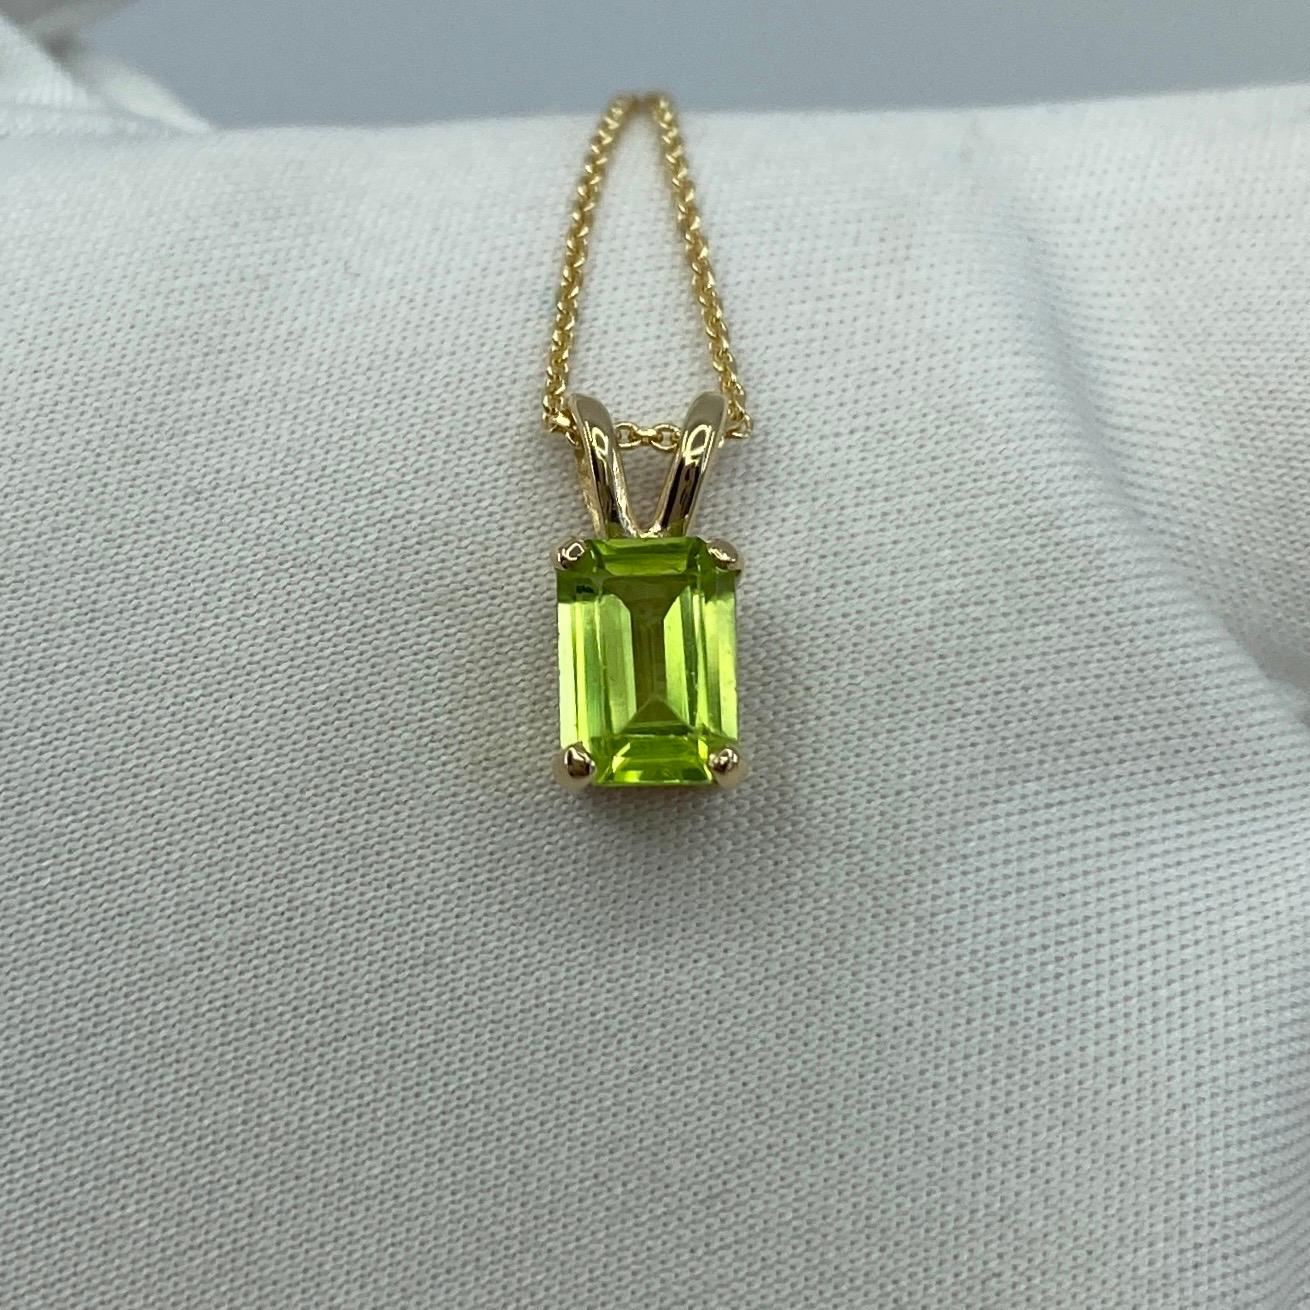 Vivid Green Emerald Cut Peridot Pendant Necklace.

Beautiful natural 1.00 carat vivid green peridot set in a fine 14k yellow gold solitaire pendant.

Stunning peridot with a vivid colour and excellent clarity, very clean stone. It also has an